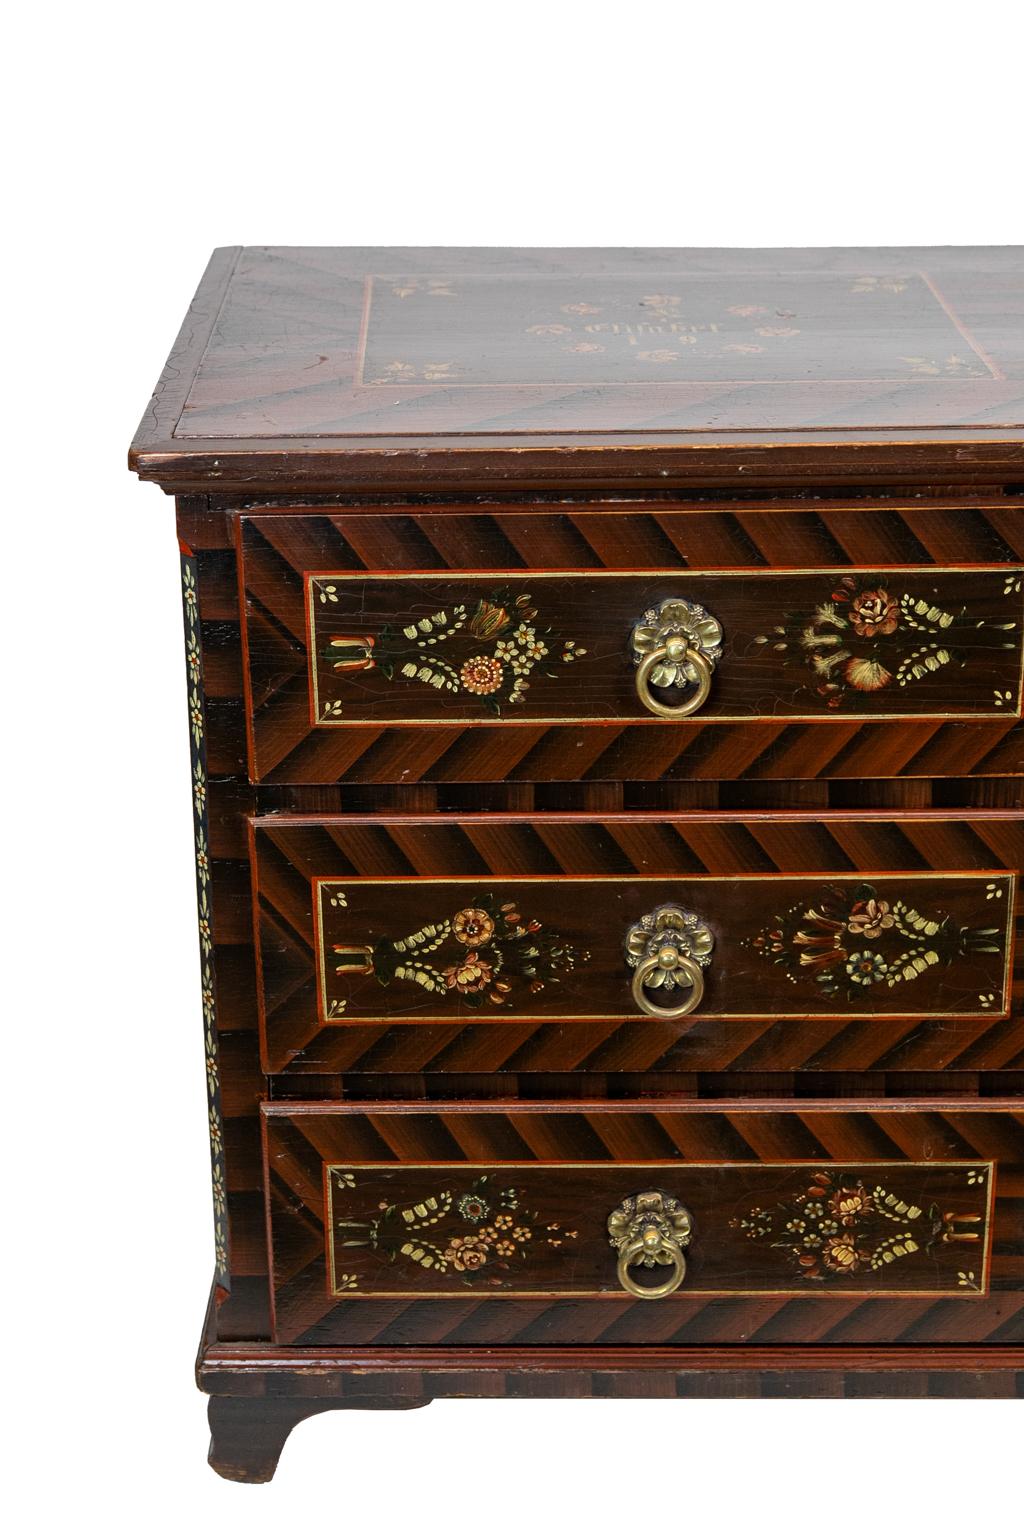 Painted European three-drawer chest, the top is faux painted to simulate herringbone banding. There are two floral cartouches on the top and each of the three drawers, dated 1900 on top.